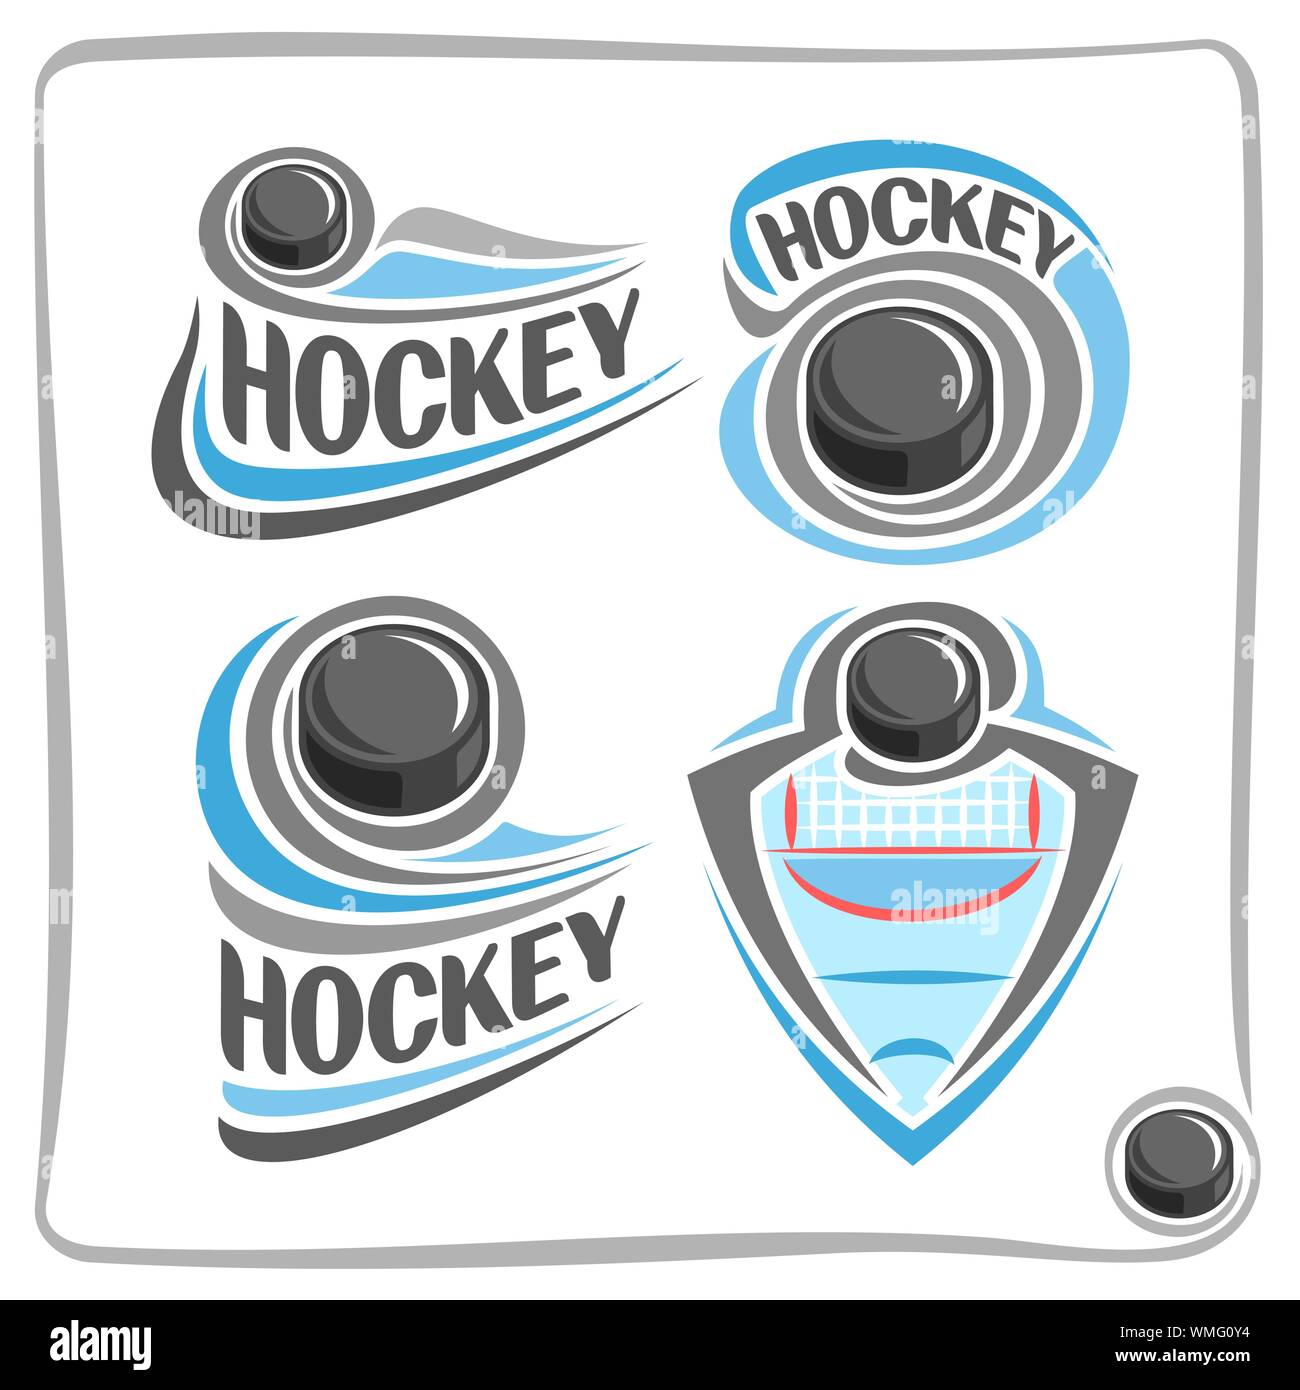 Vector abstract logo for Ice Hockey, signs for sports club, simple hockey puck flying above ice rink in goal gate with net, isolated sporting icons on Stock Vector